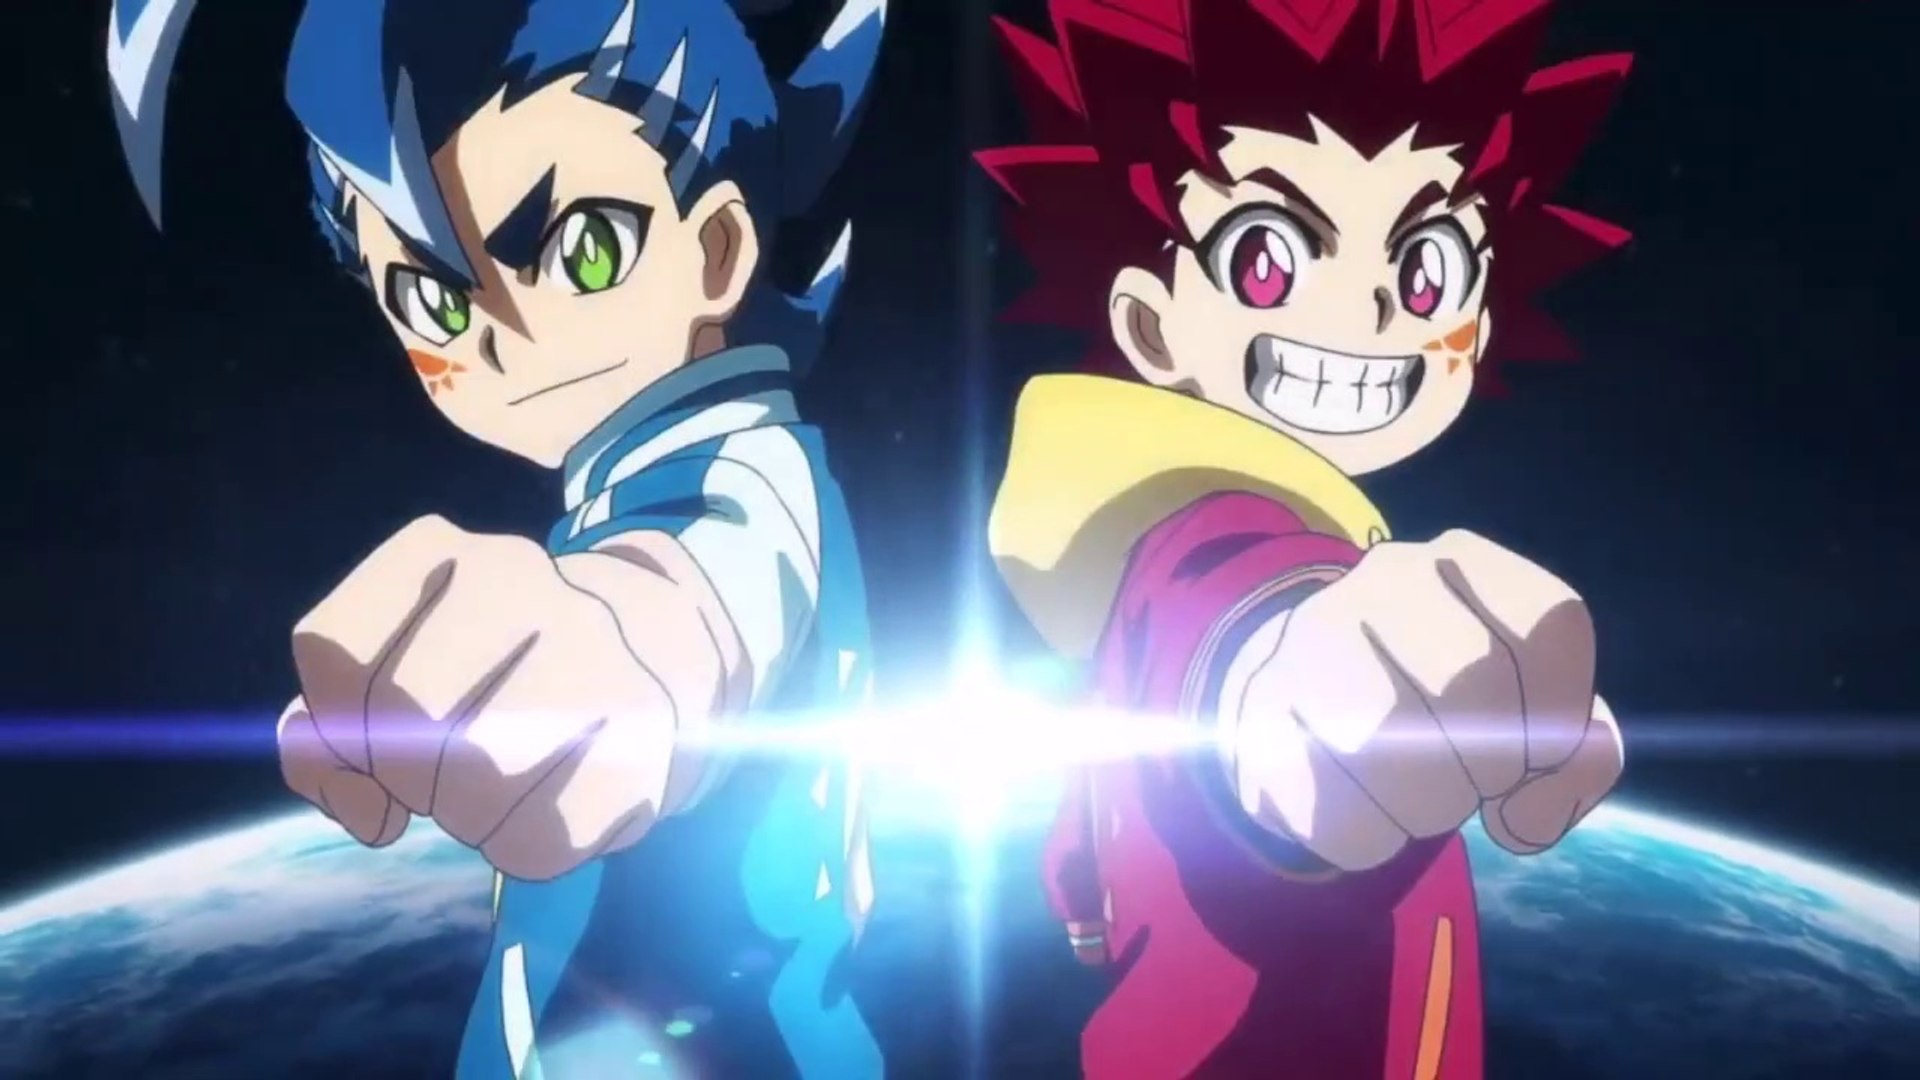 Justering Sinis ale Beyblade Burst Surge Ep 1 Eng Dub - video Dailymotion